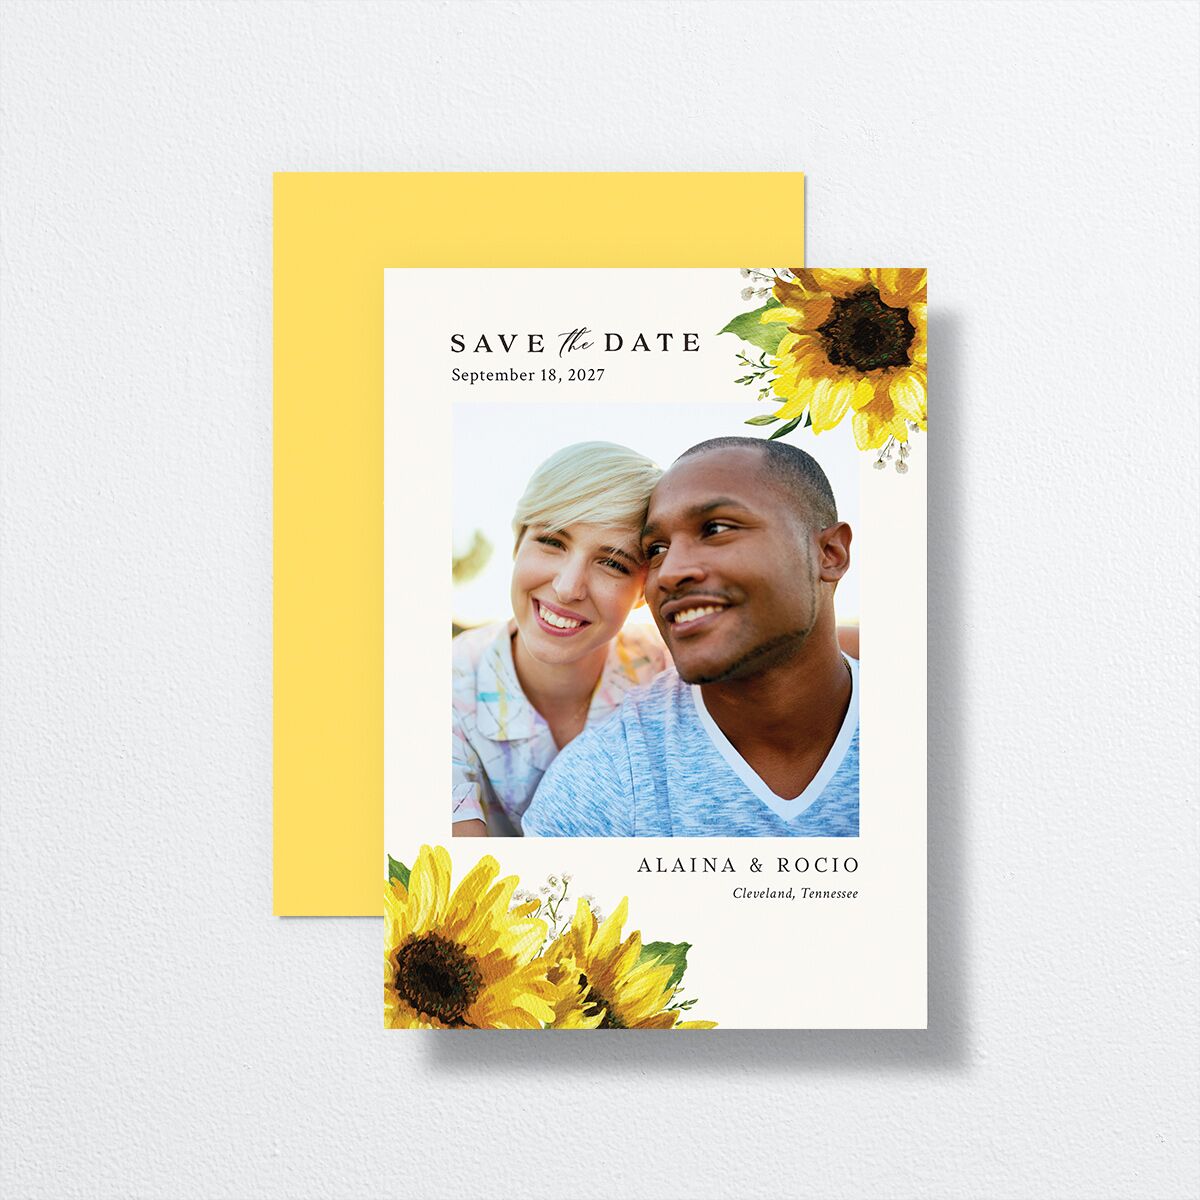 Rustic Sunflower Save The Date Cards front-and-back in yellow